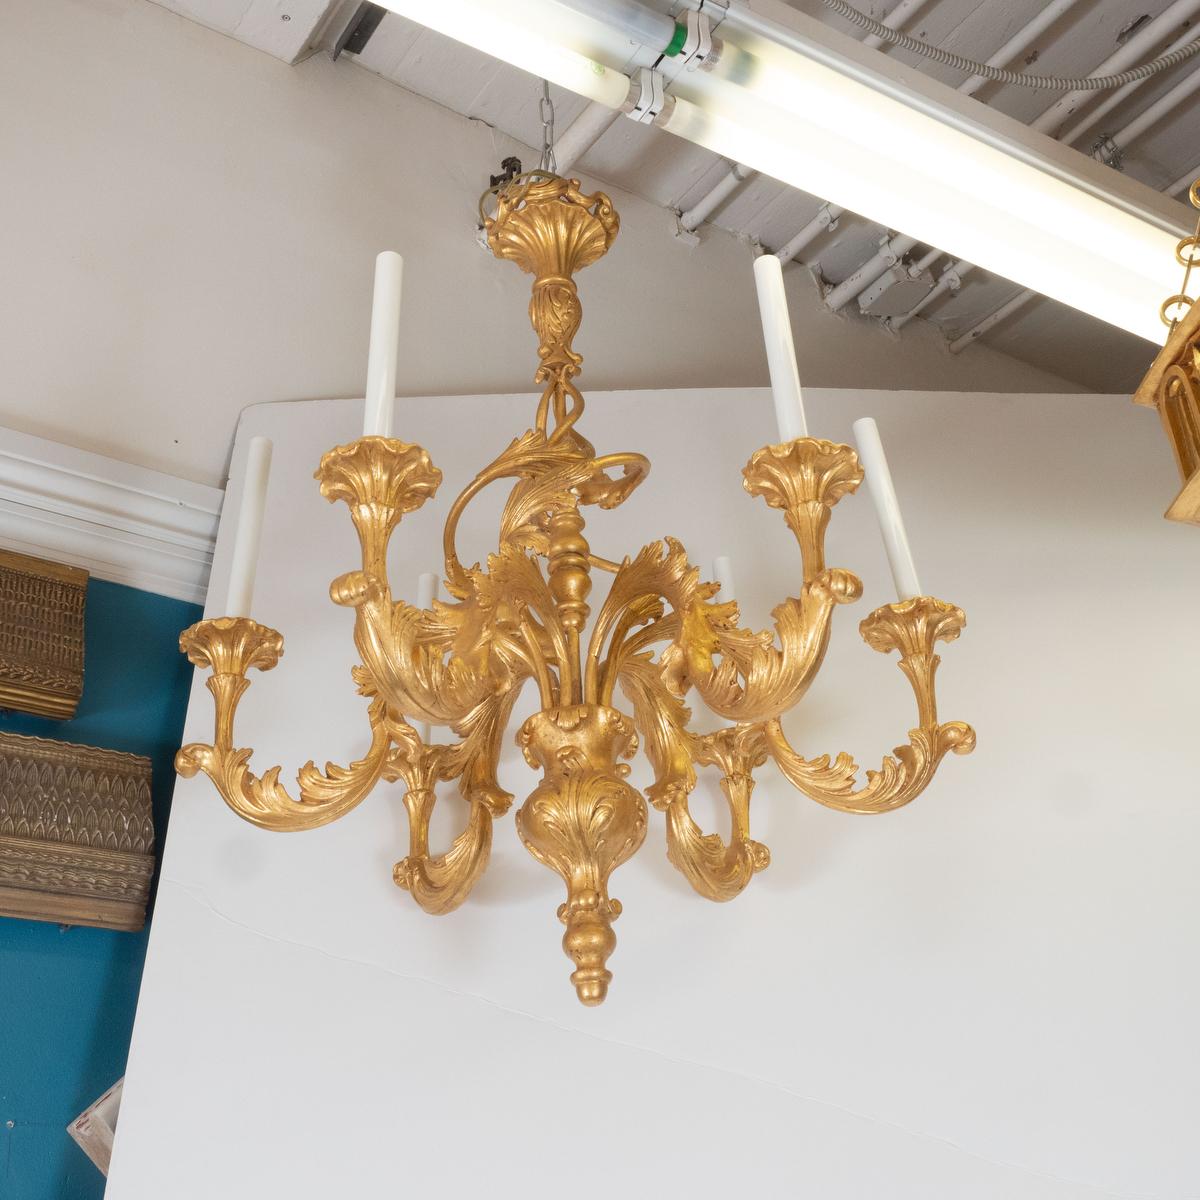 Giltwood woodcarving chandelier with intricately detailed foliate motif by master woodworker Carlos Villegas